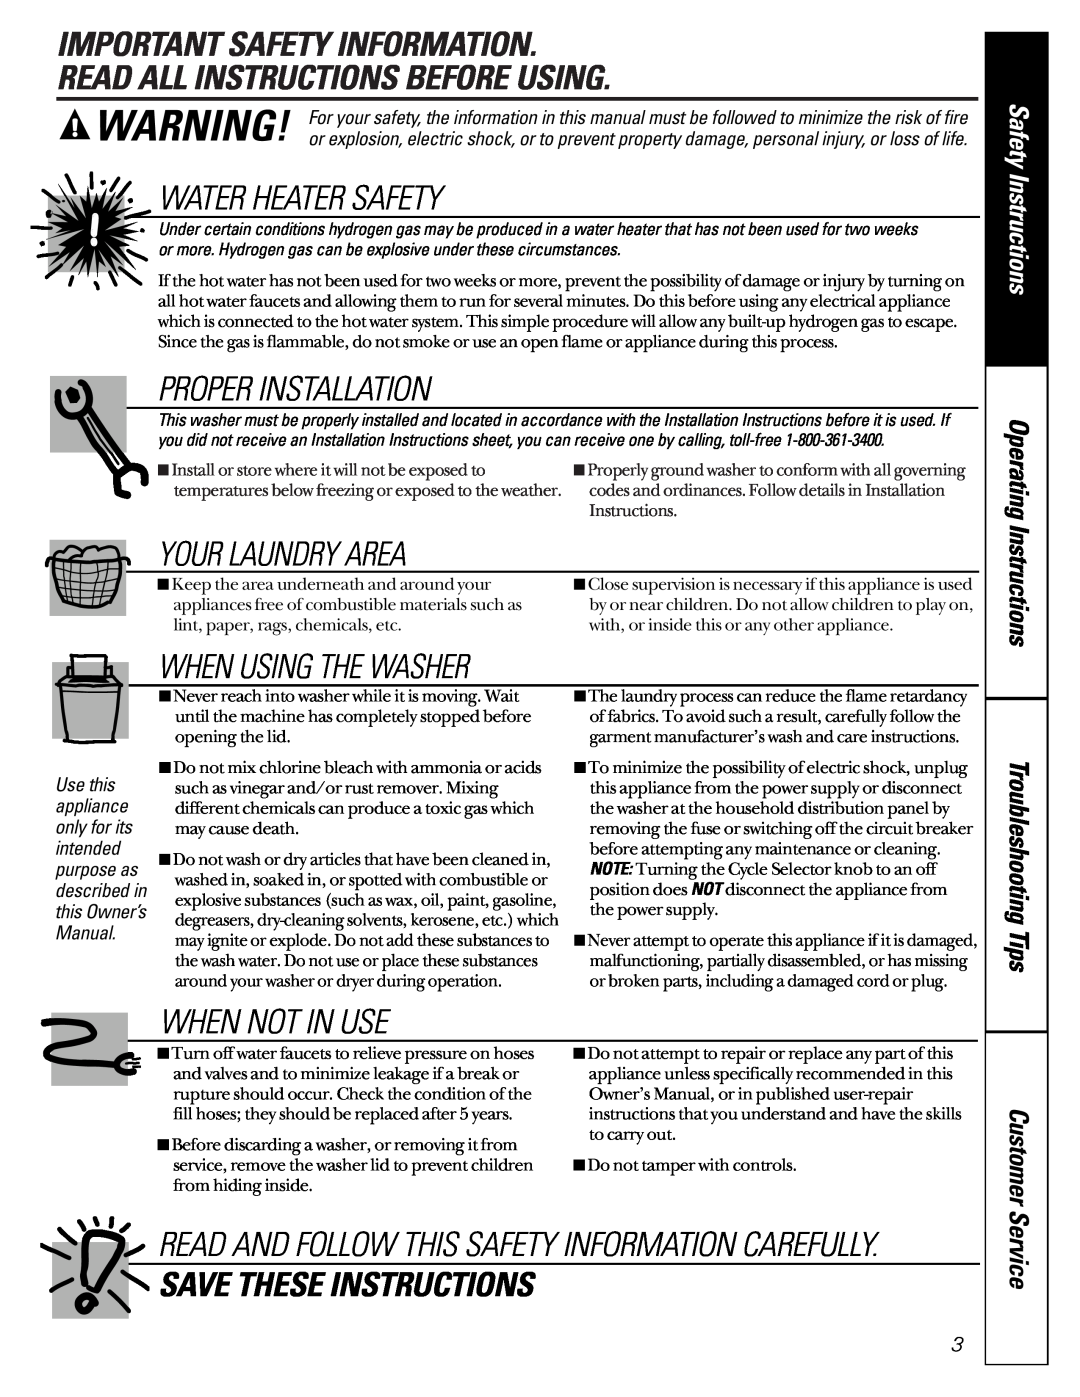 GE GJXR2130 Important Safety Information Read All Instructions Before Using, Water Heater Safety, Proper Installation 